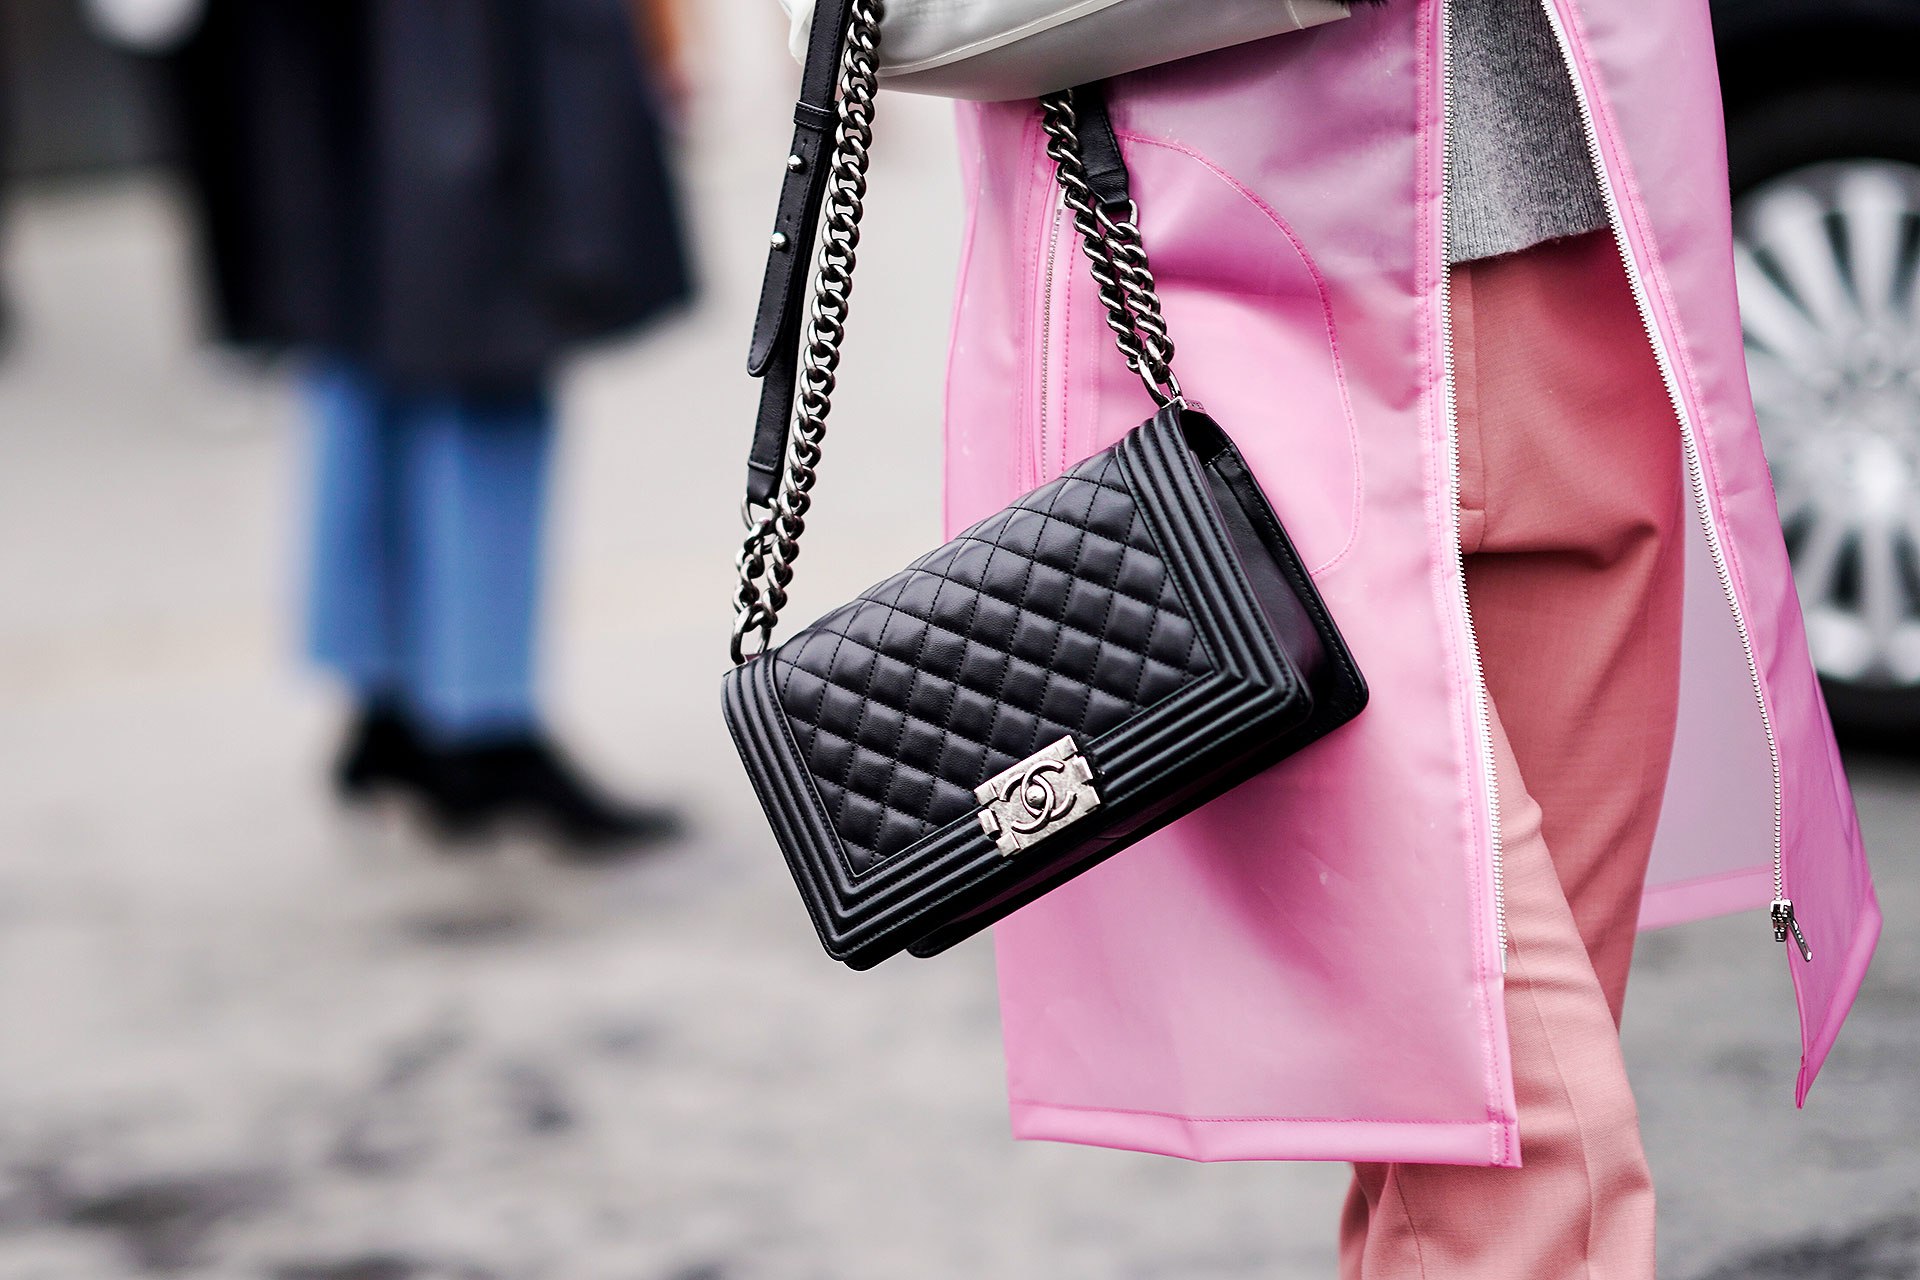 All the iconic vintage bags we wanna steal from Chiara Ferragni's closet